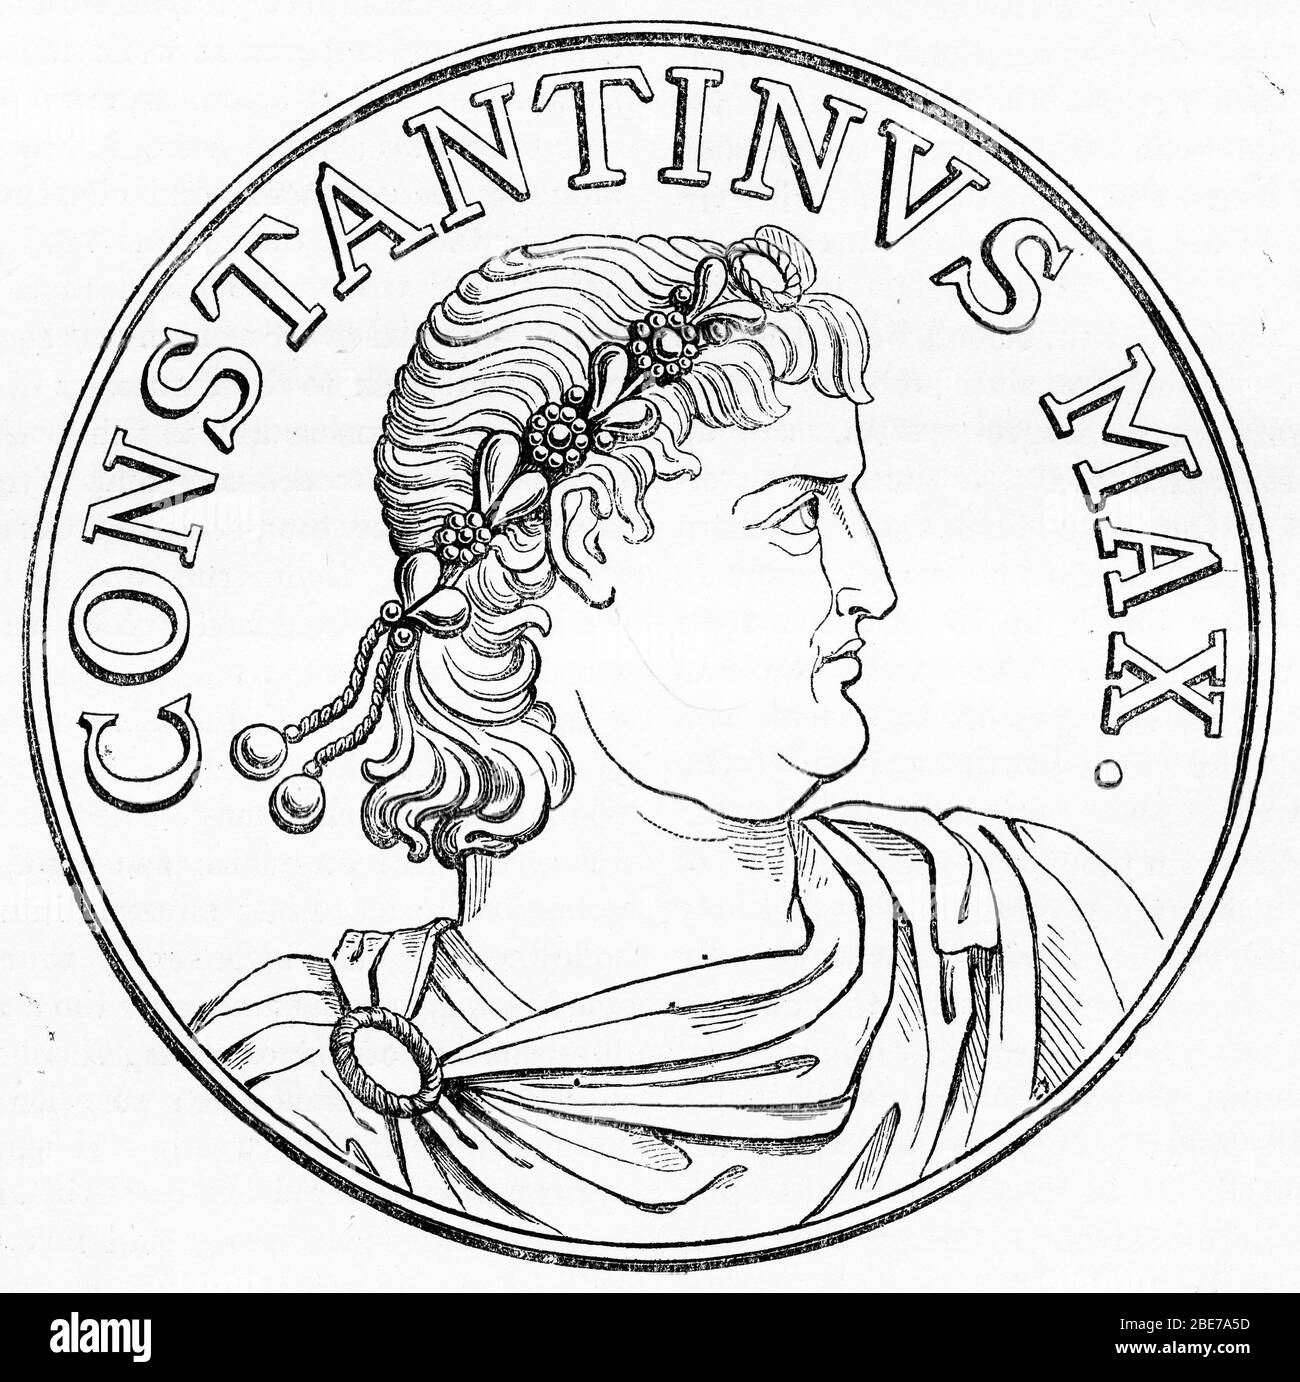 Engraved portrait of Constantine the Great (272 - 337), also known as Constantine I, a Roman Emperor who ruled between AD 306 and 337. Stock Photo